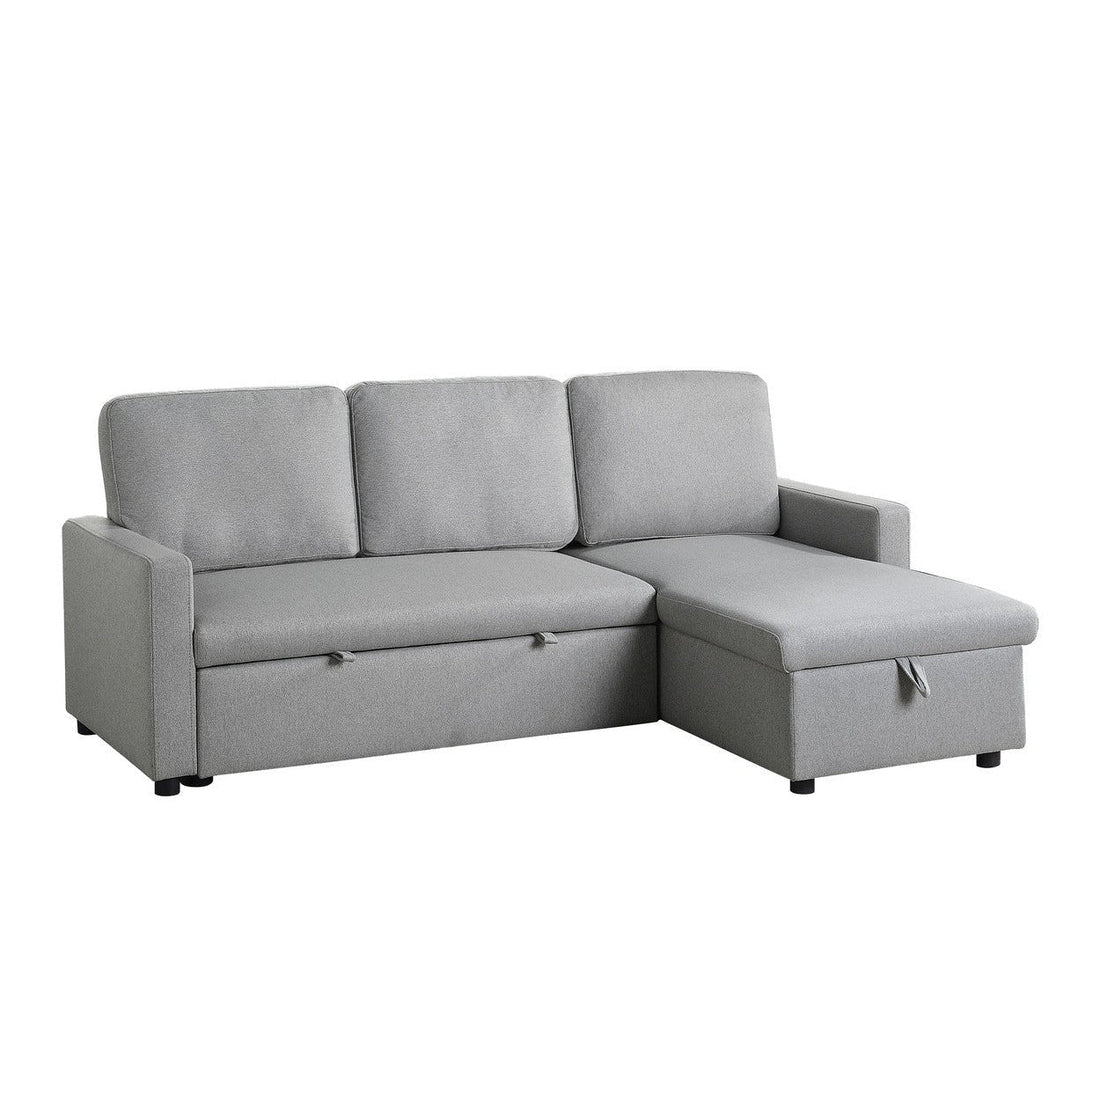 (2)2-Piece Reversible Sectional with Pull-out Bed and Hidden Storage 9359GRY*SC